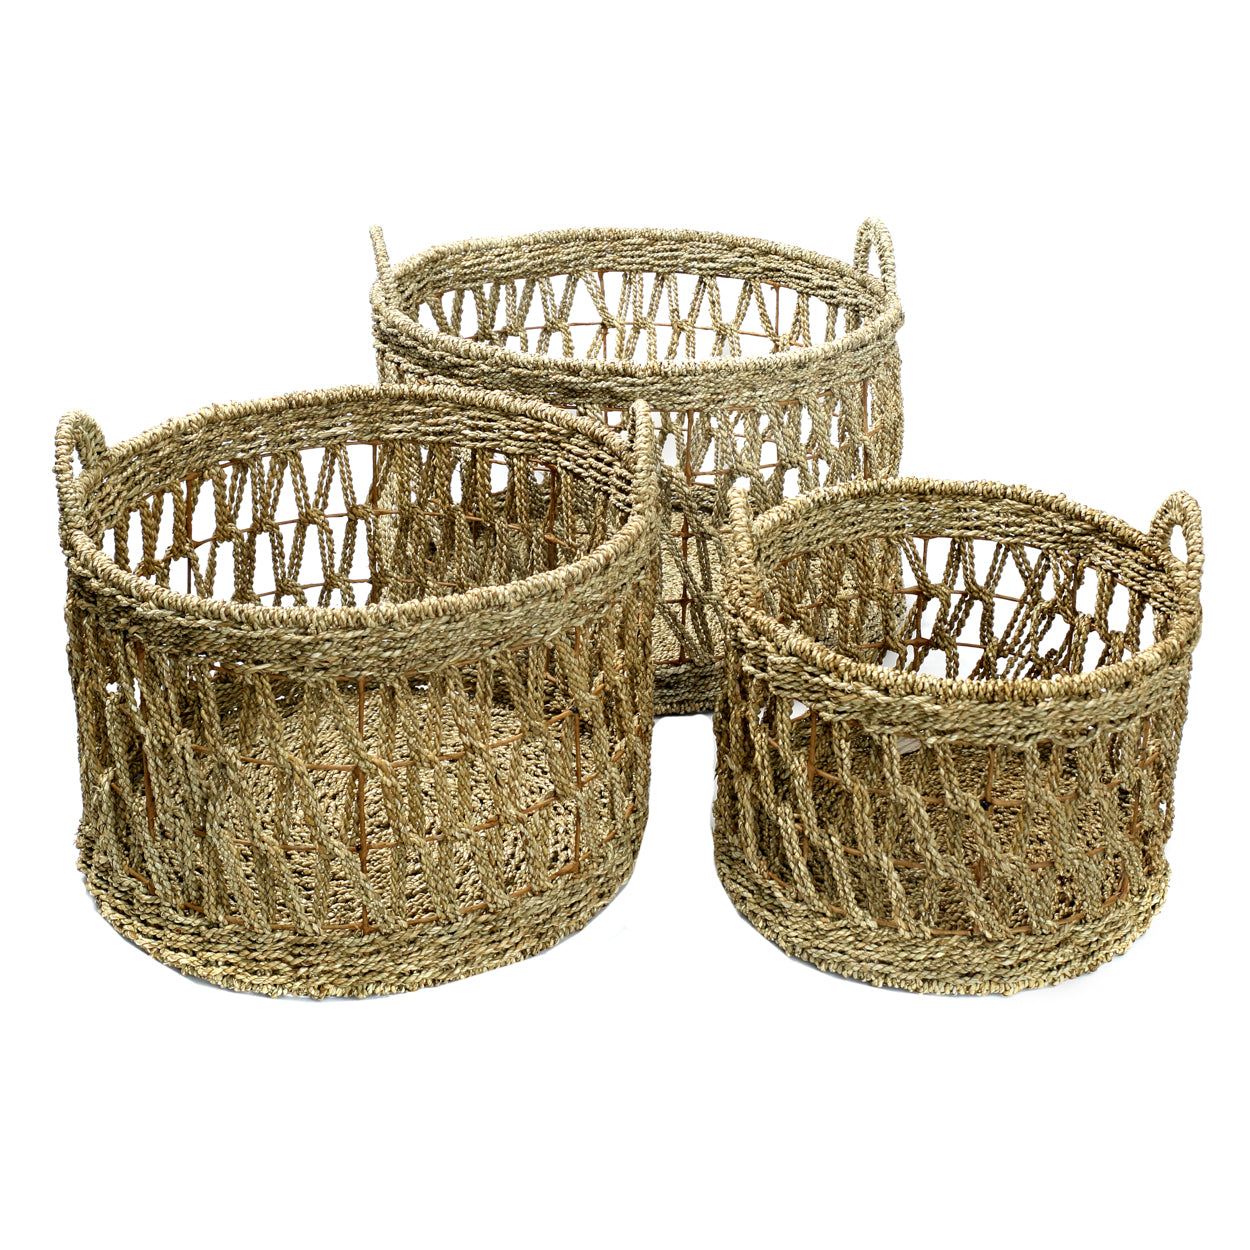 THE PERFORE Baskets Set of 3 front view